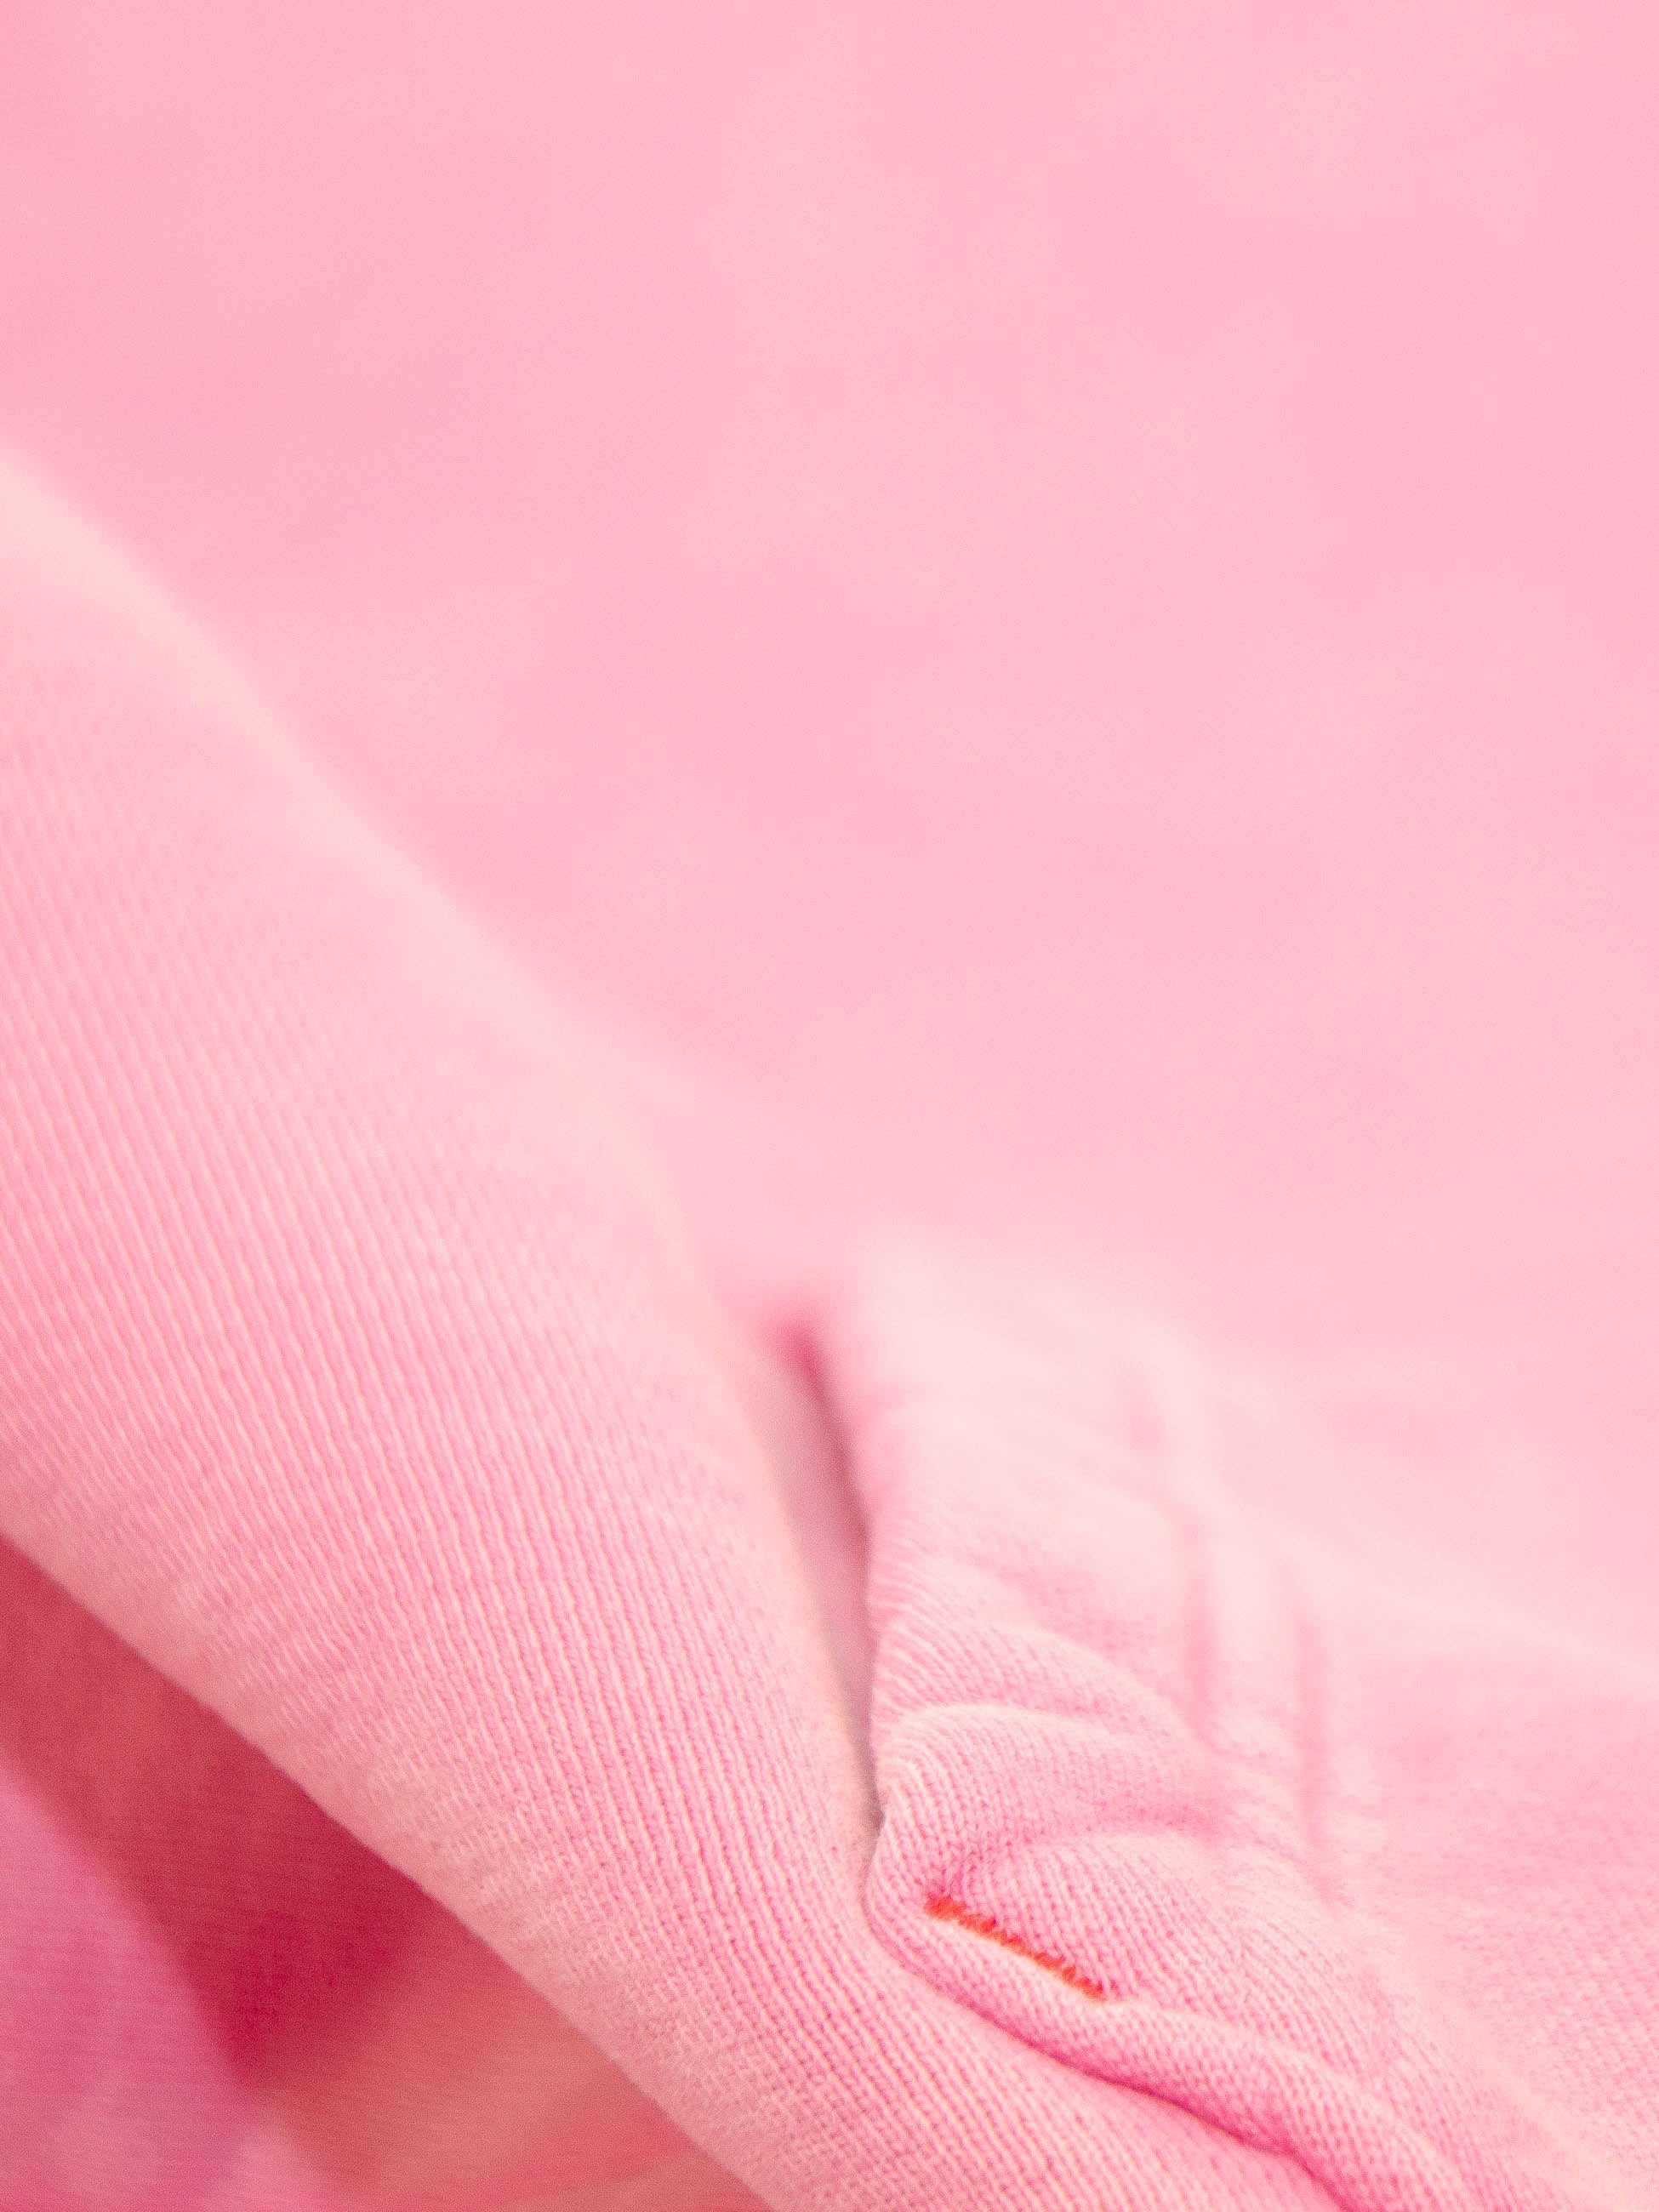 Publik Brand Single Layered Hoodie Hollywood Cerise Pink Heavyweight Fleece, all made in USA, fabric detail, softness, texture